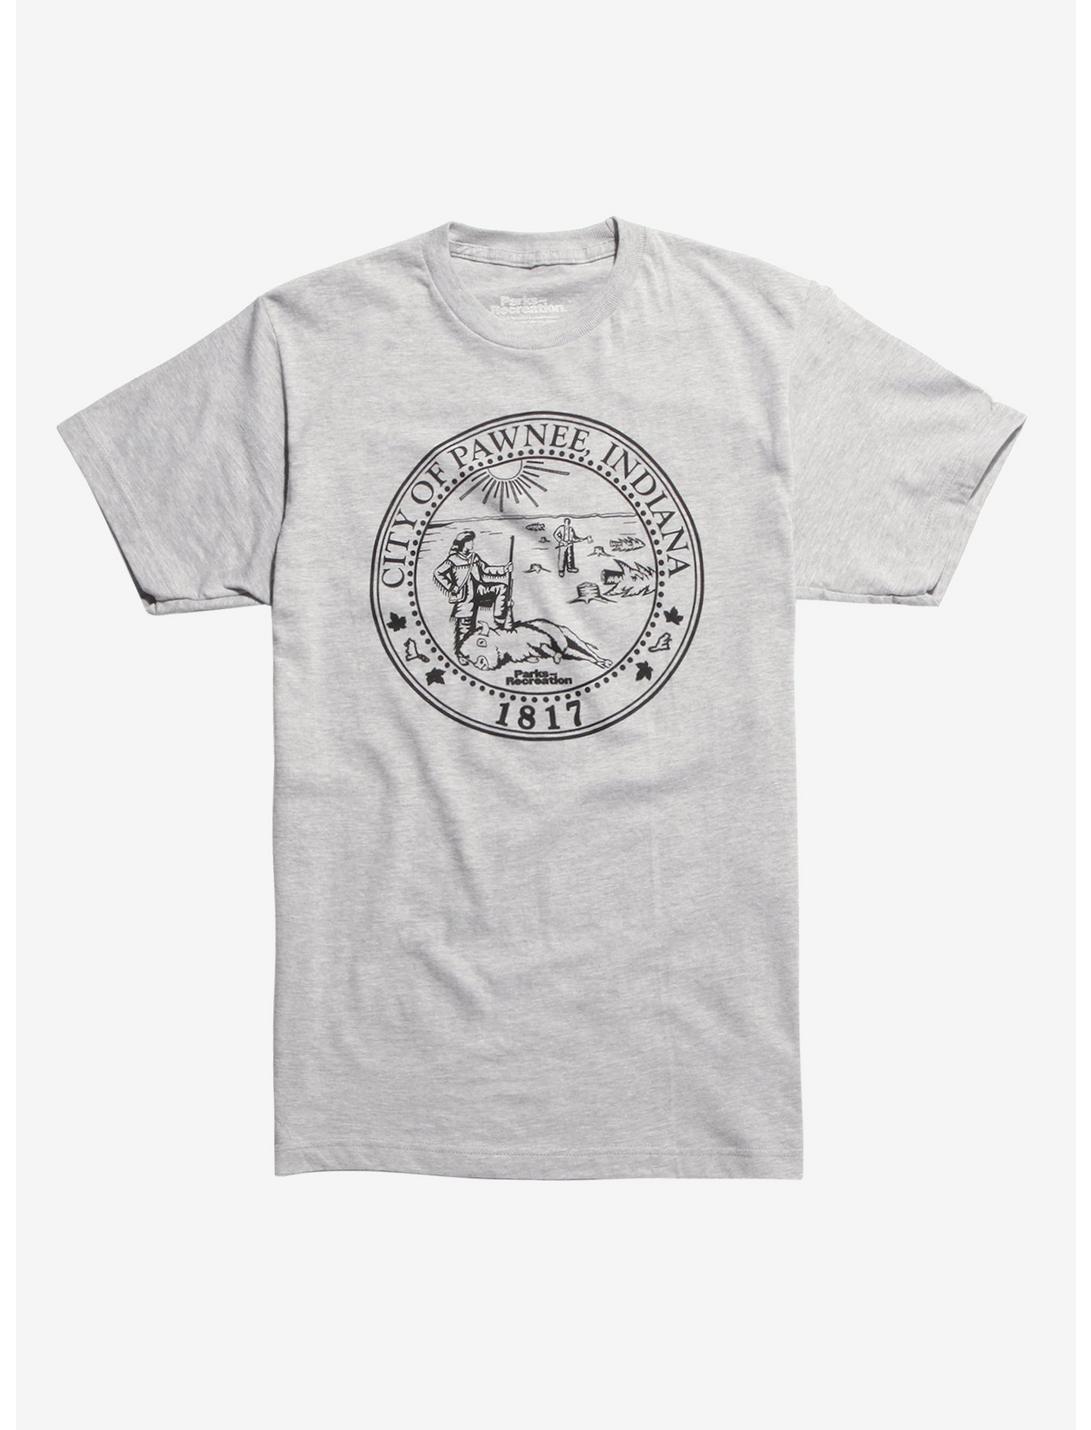 Parks And Recreation Pawnee City Seal T-Shirt, BLACK, hi-res